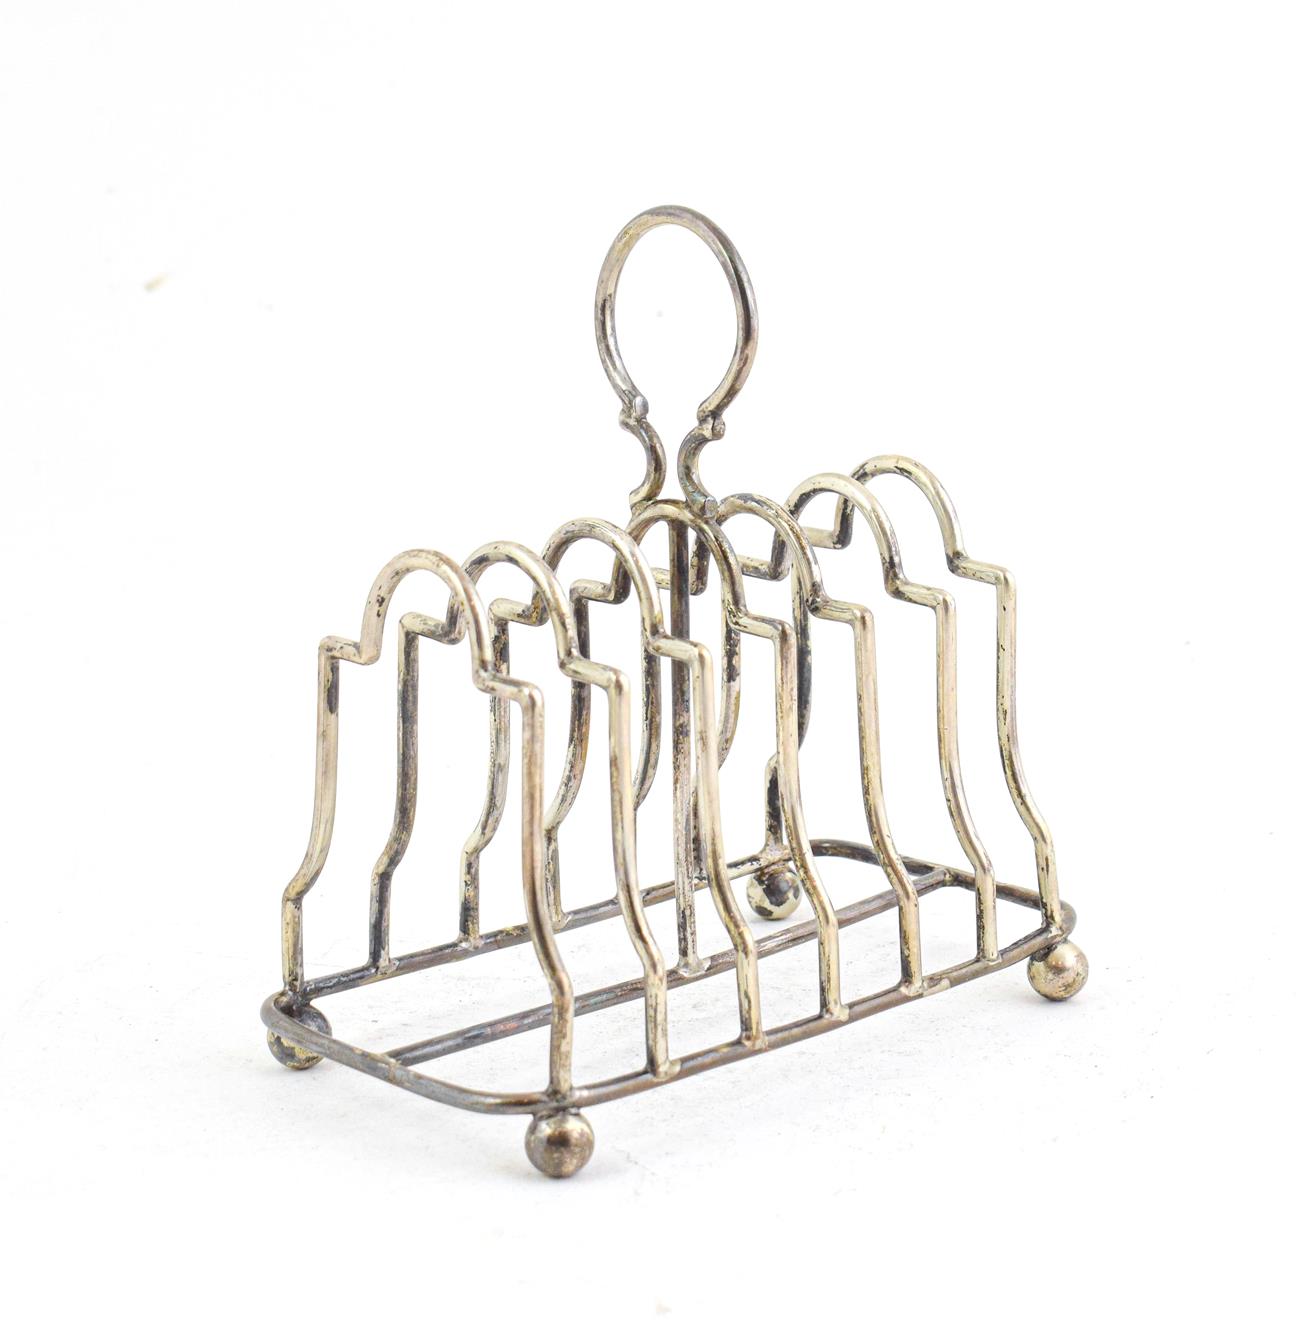 Lot 60 - An Edward VII Silver Toast rack, by William Aitken, Birmingham, 1902, oblong and on four ball feet